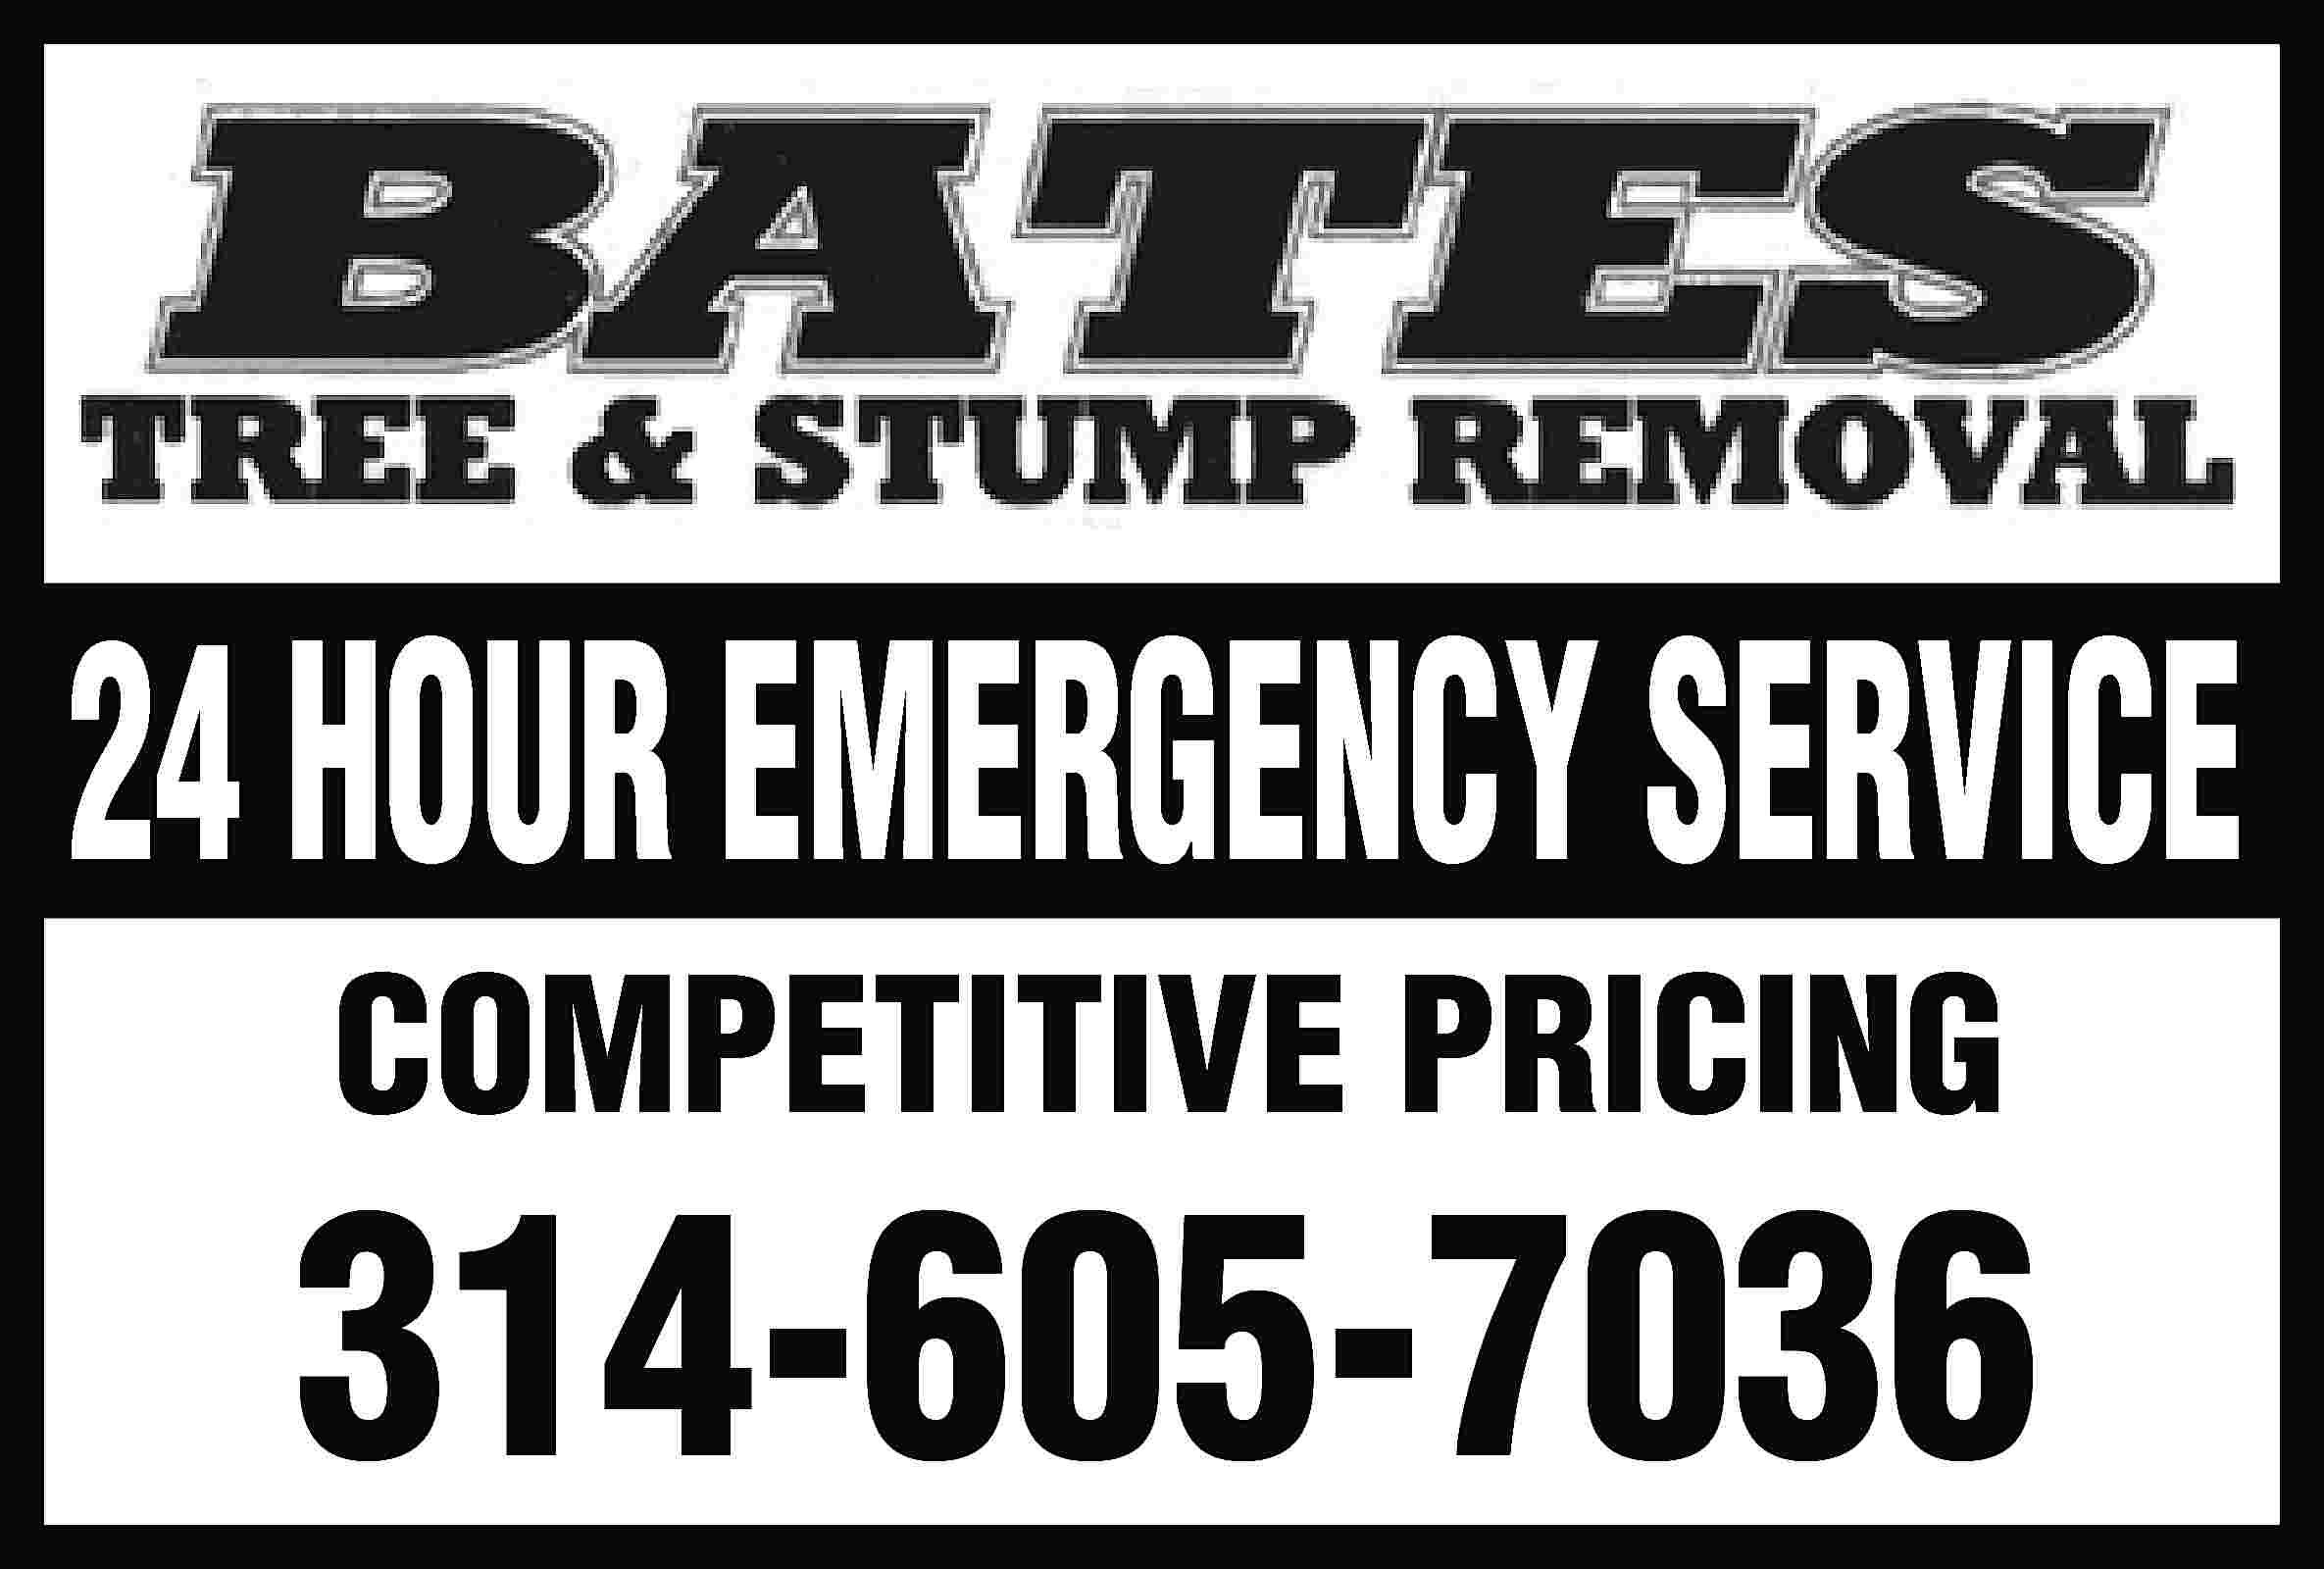 24 HOUR EMERGENCY SERVICE COMPETITIVE  24 HOUR EMERGENCY SERVICE COMPETITIVE PRICING 314-605-7036